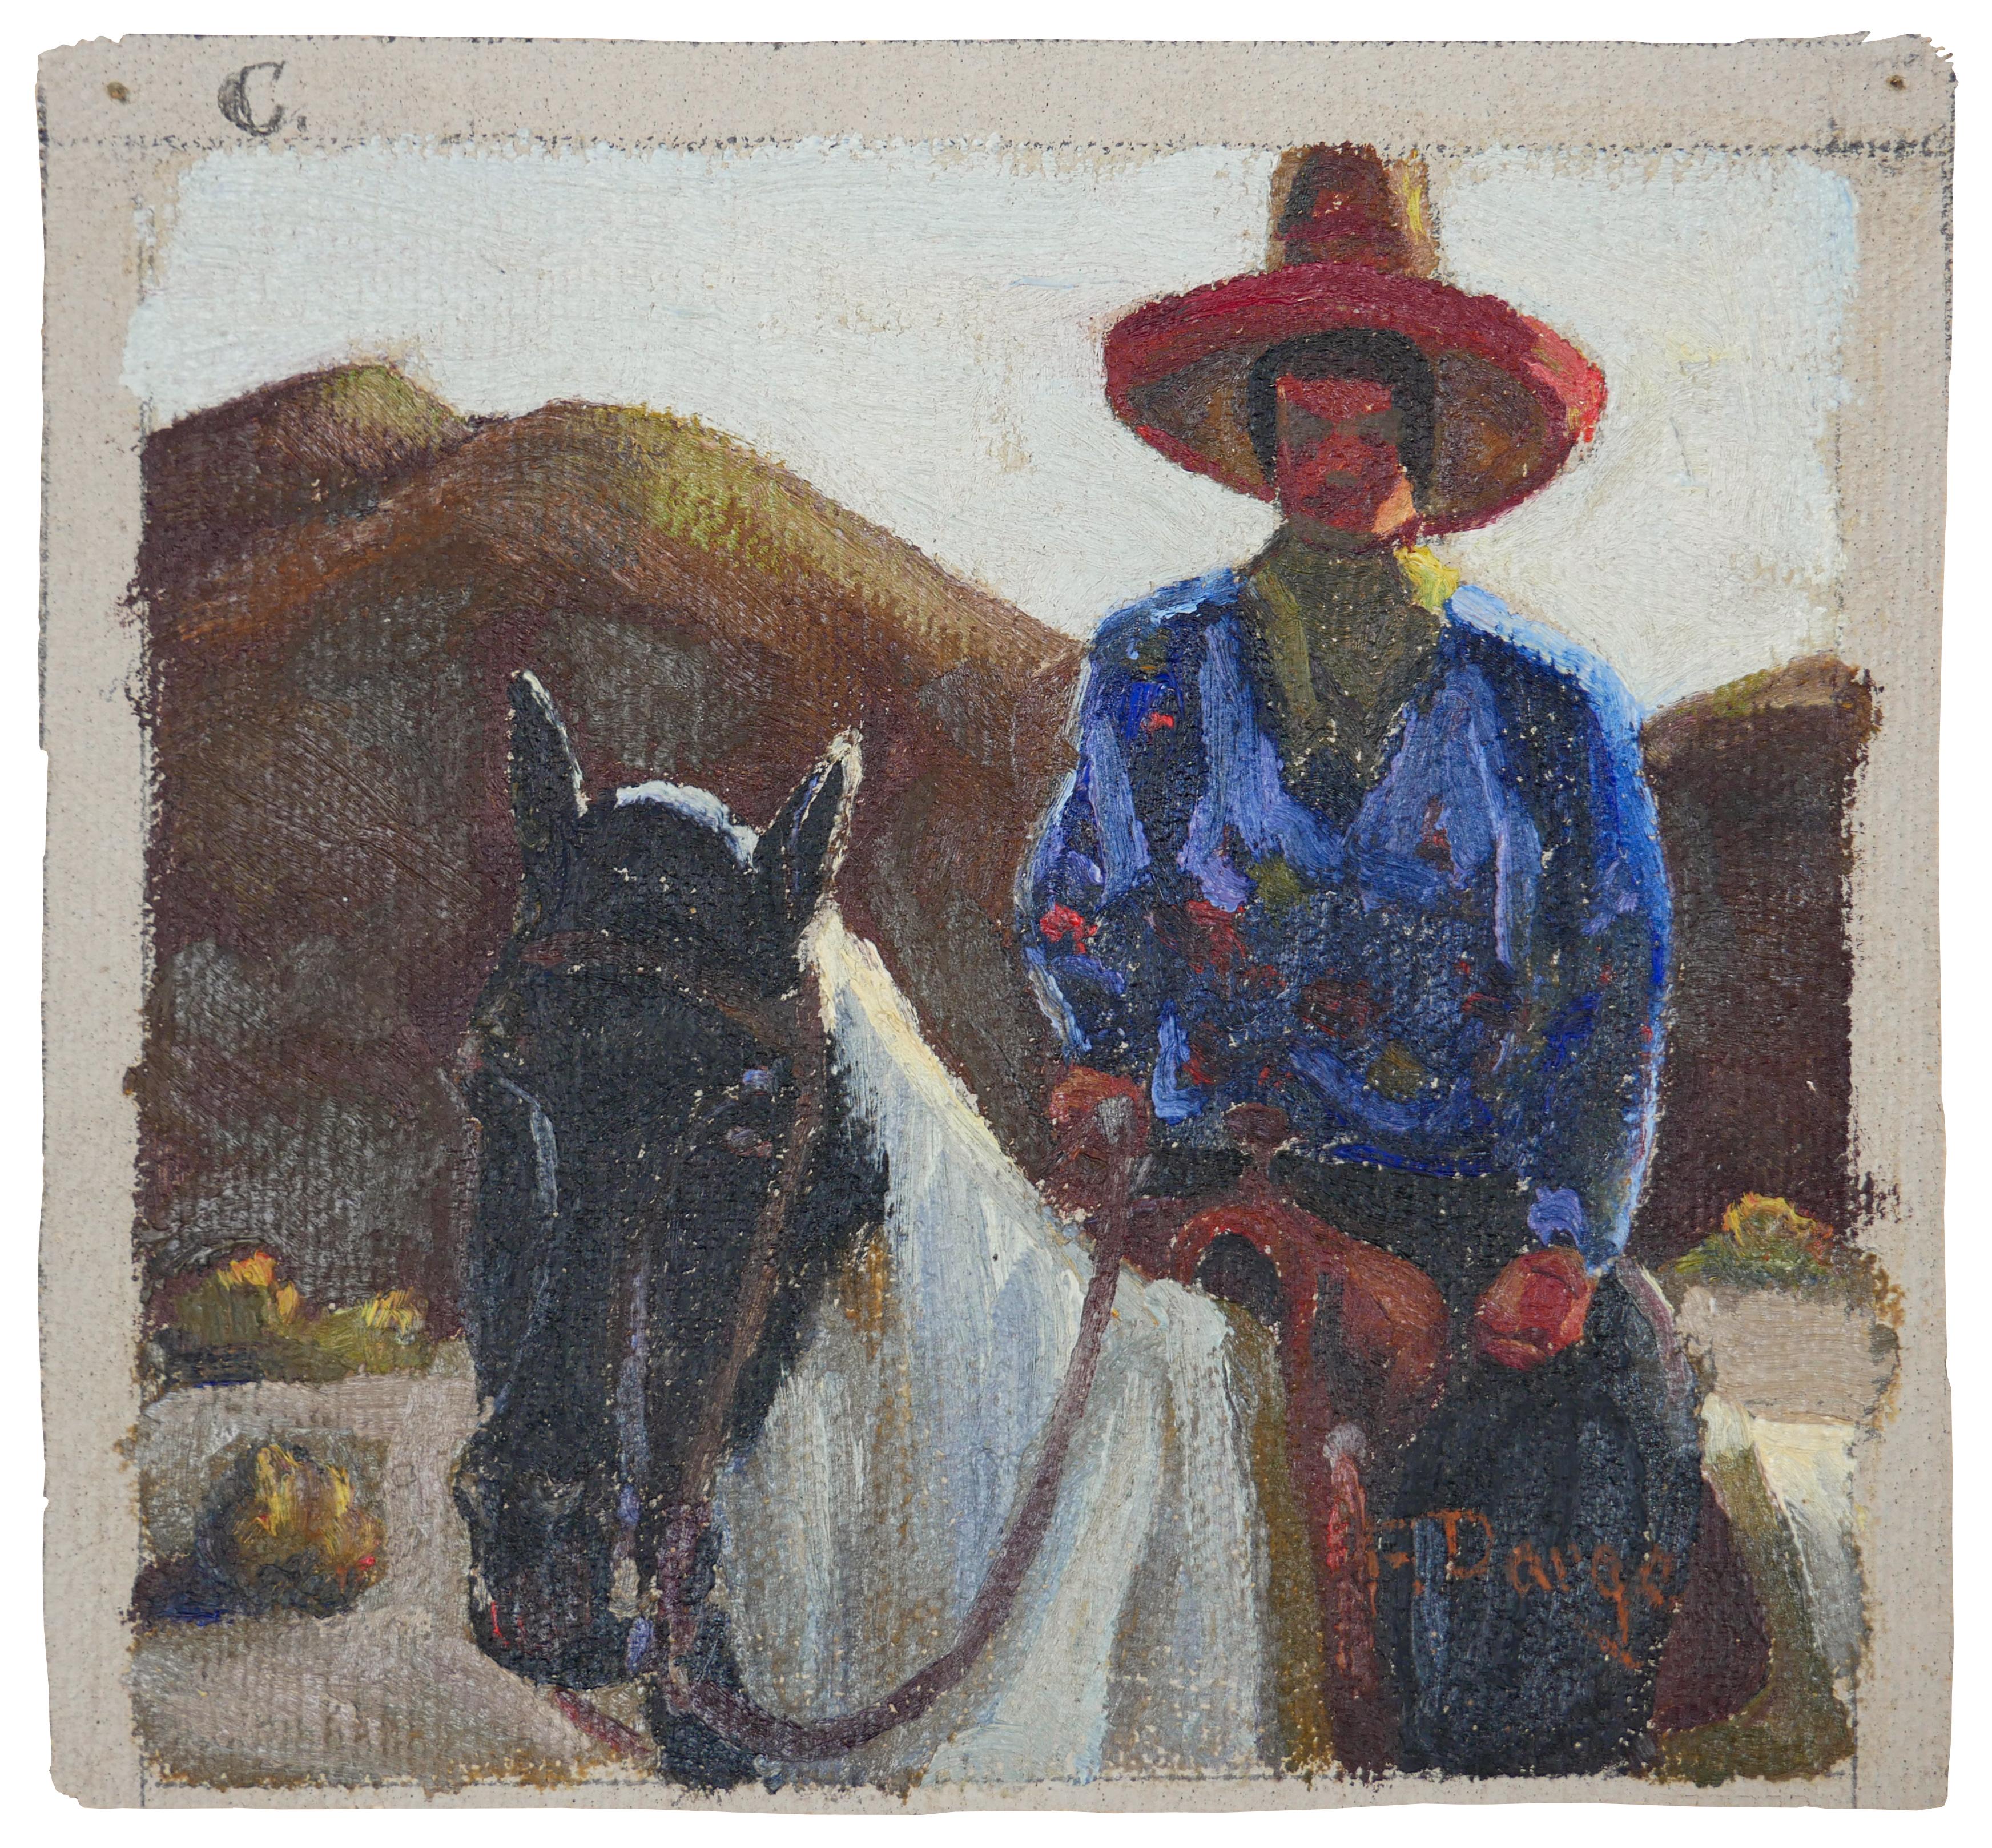 Fred Darge Animal Painting - Blue, Red, and Brown Abstract Impressionist Painting of a Cowboy on a Horse